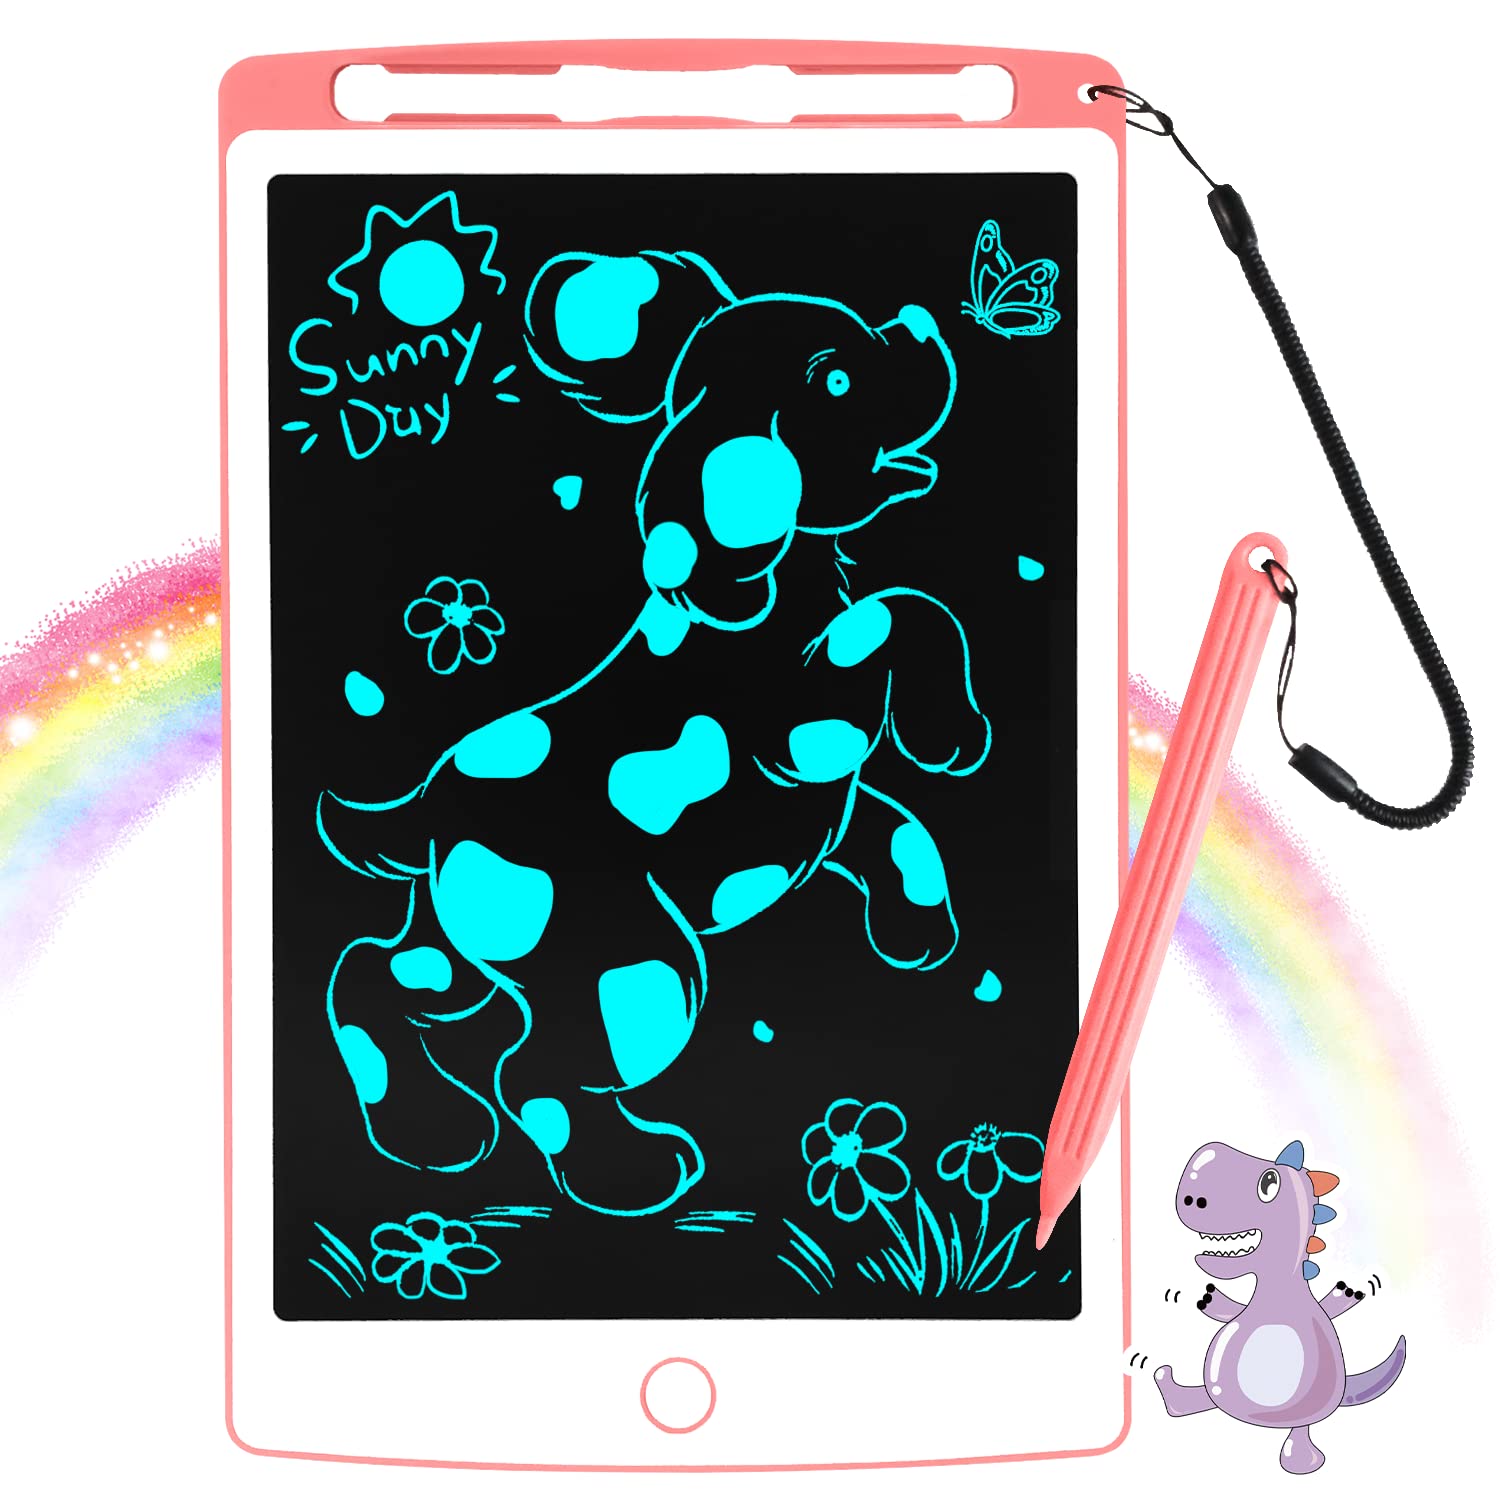 RichGV Toys Gifts , Lcd Writing Tablet For Kids, Toddler Toys For 3 4 5 6 7 Year Old, 85 Inch Doodle Board Erasable Drawing Tablet Writ